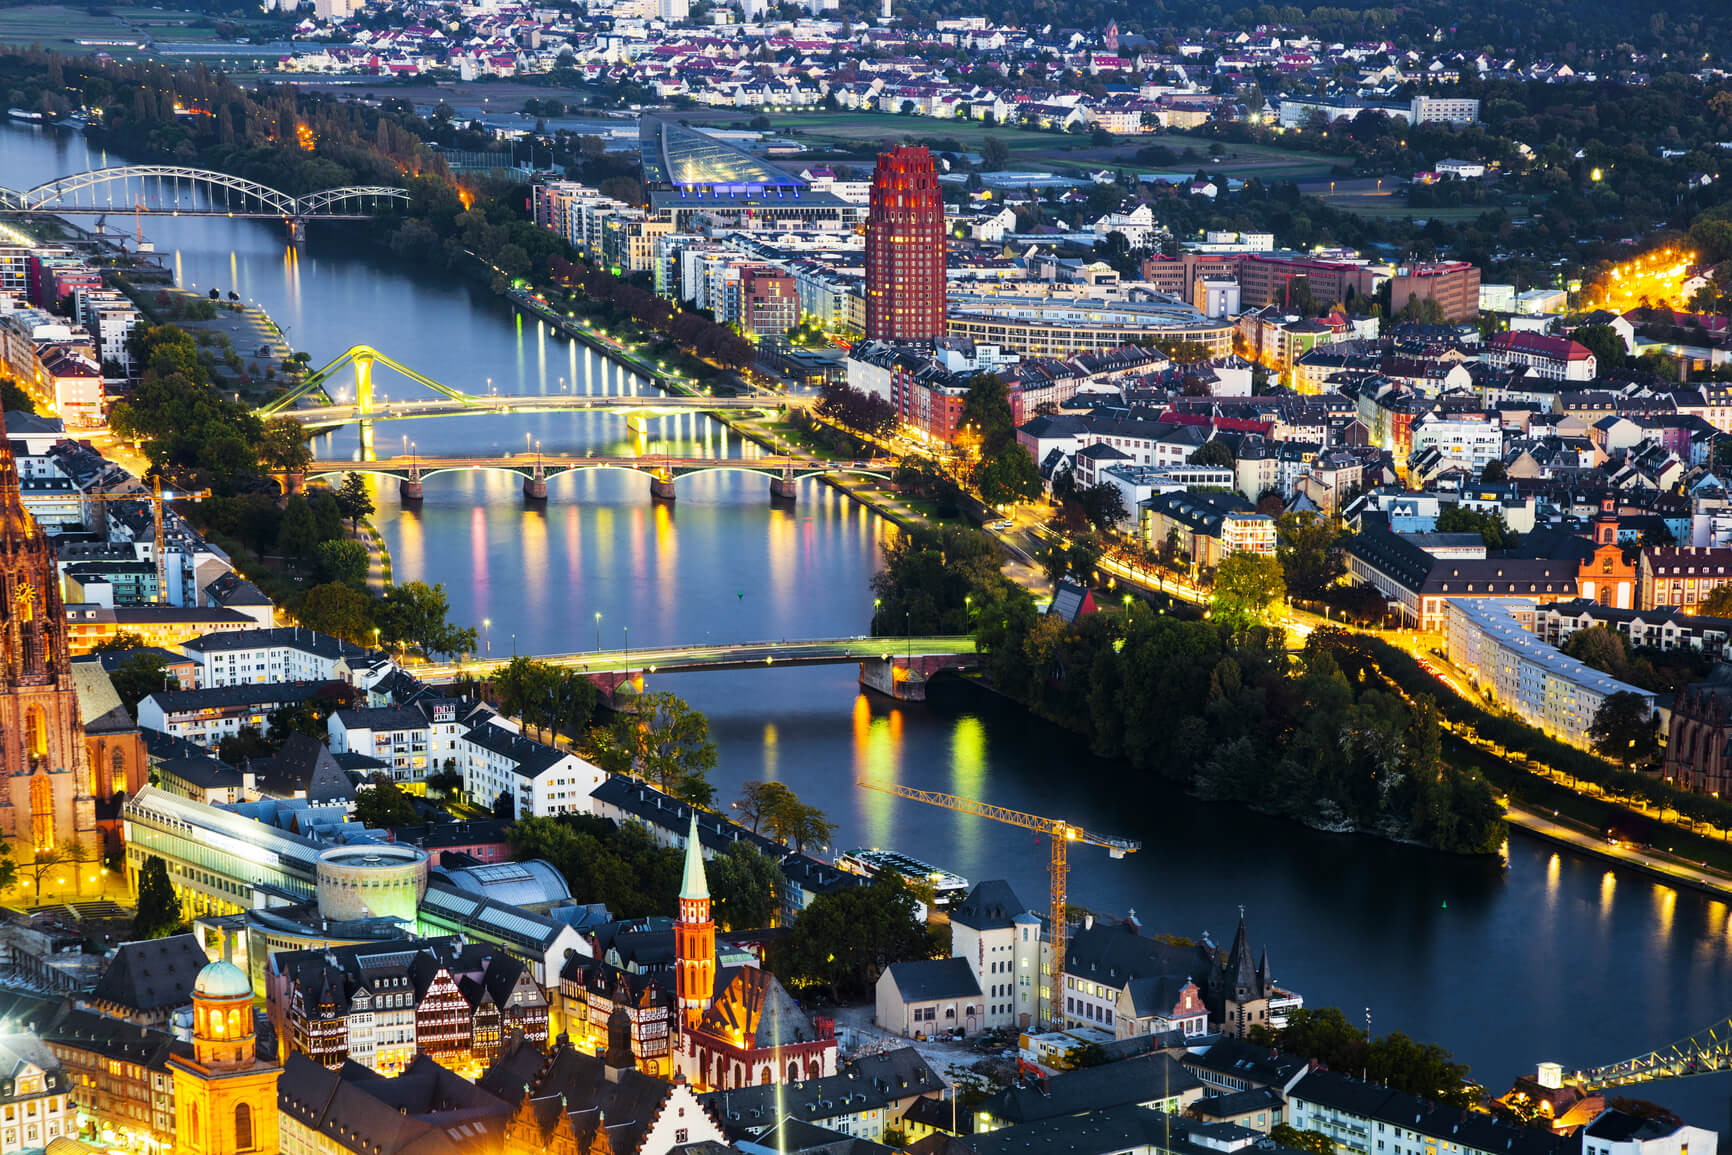 <div class='expired'>EXPIRED</div>HOT!! San Juan, Puerto Rico to Frankfurt, Germany for only $113 USD one-way | Secret Flying